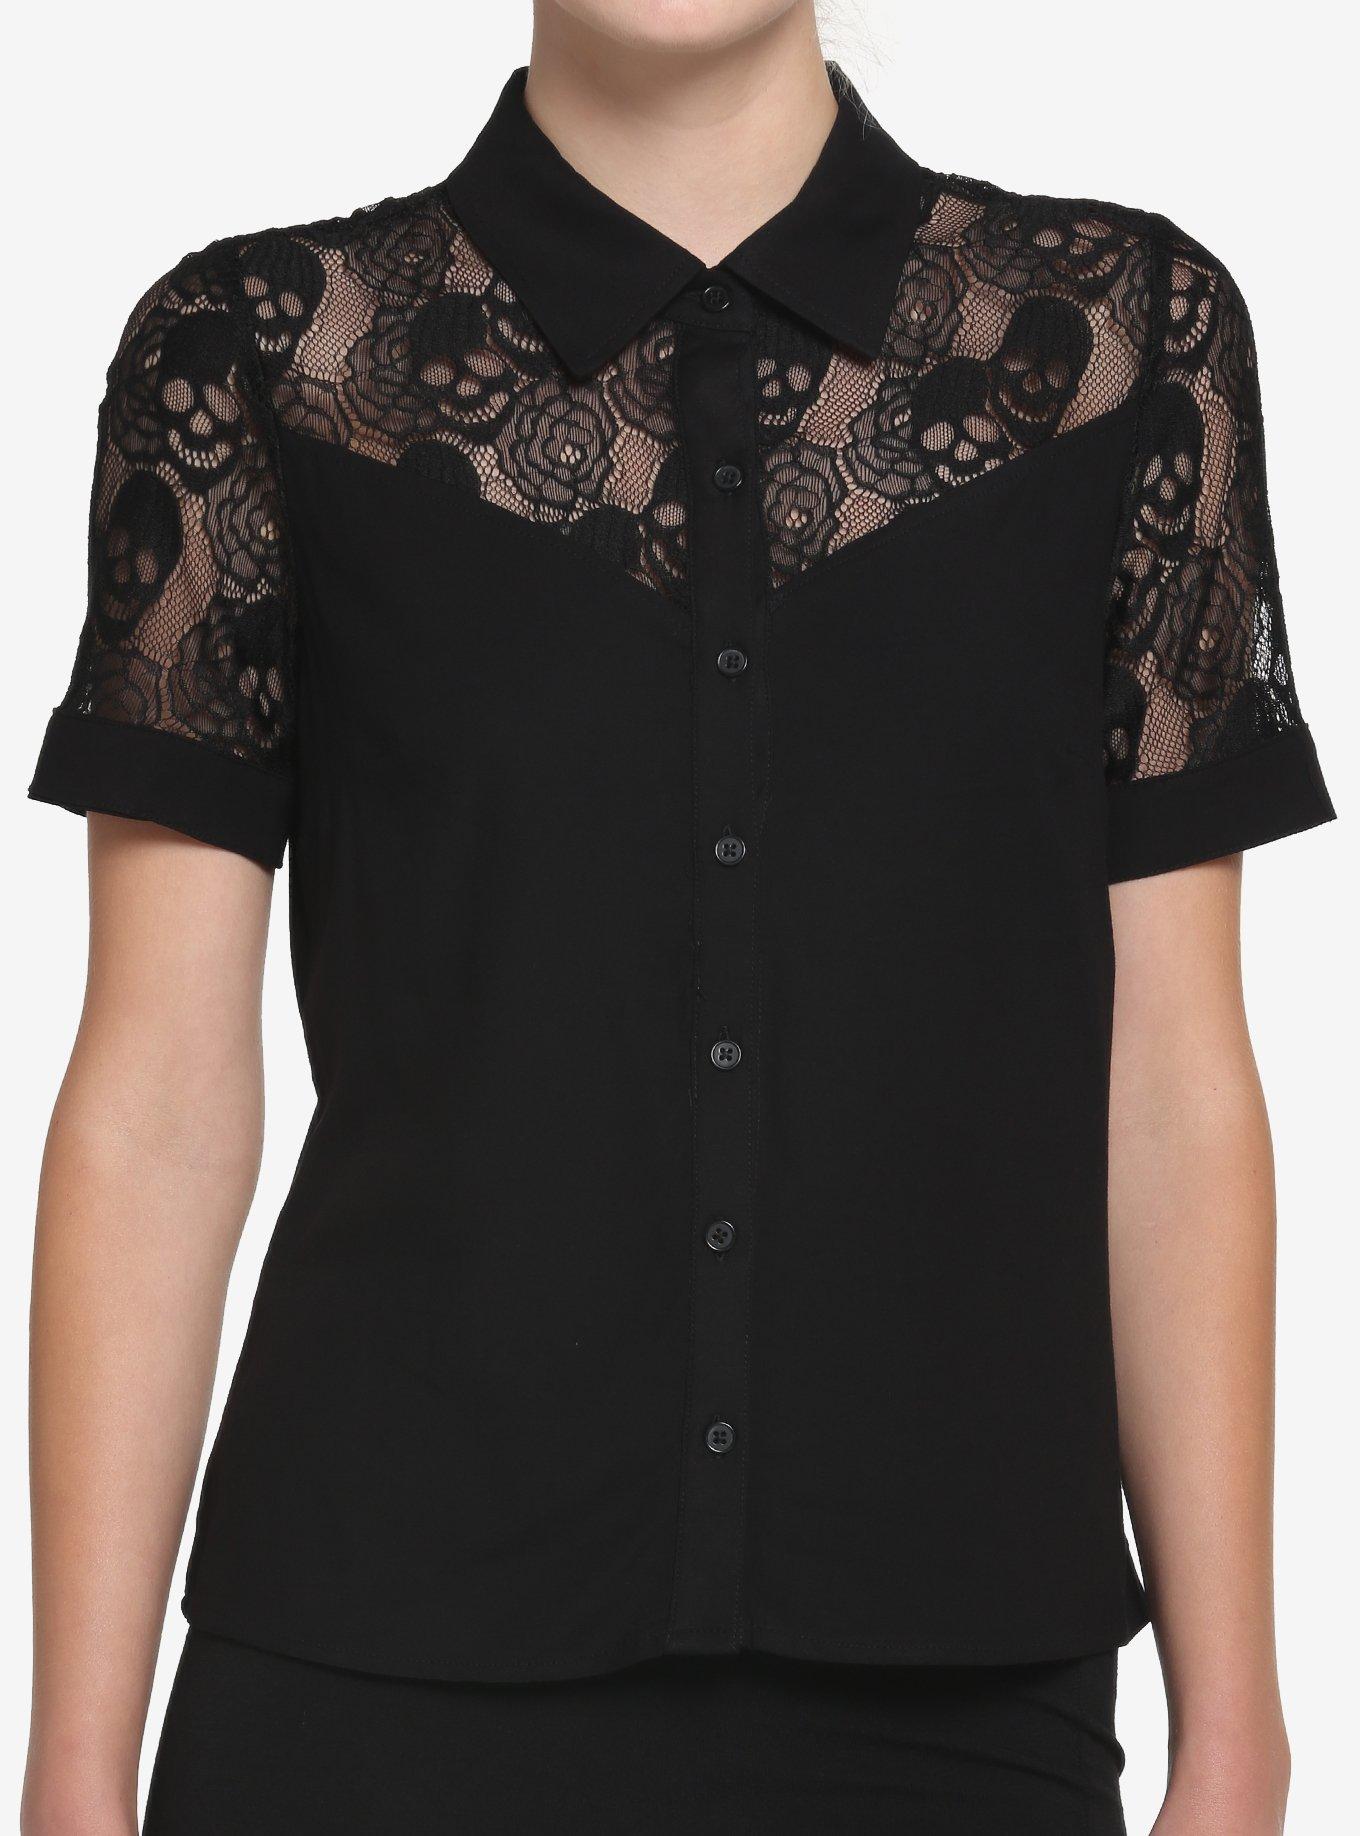 Black Skull Lace Girls Woven Button-Up, BLACK, hi-res